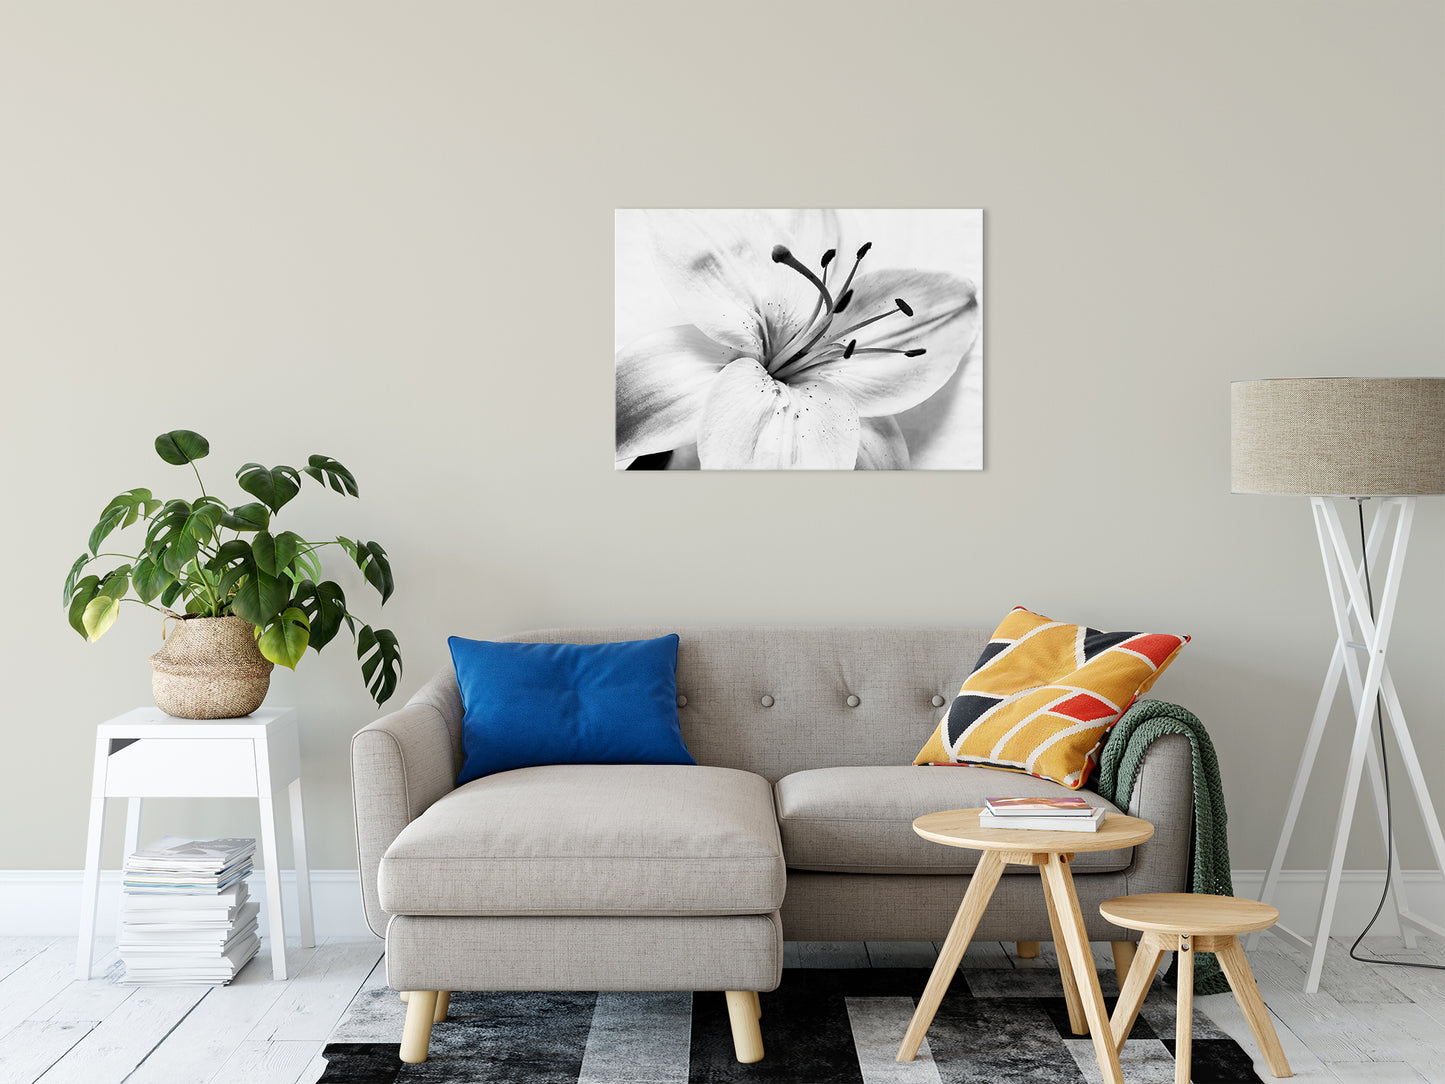 High Key Lily Black & White Nature / Floral Photo Fine Art Canvas Wall Art Prints 24" x 36" - PIPAFINEART